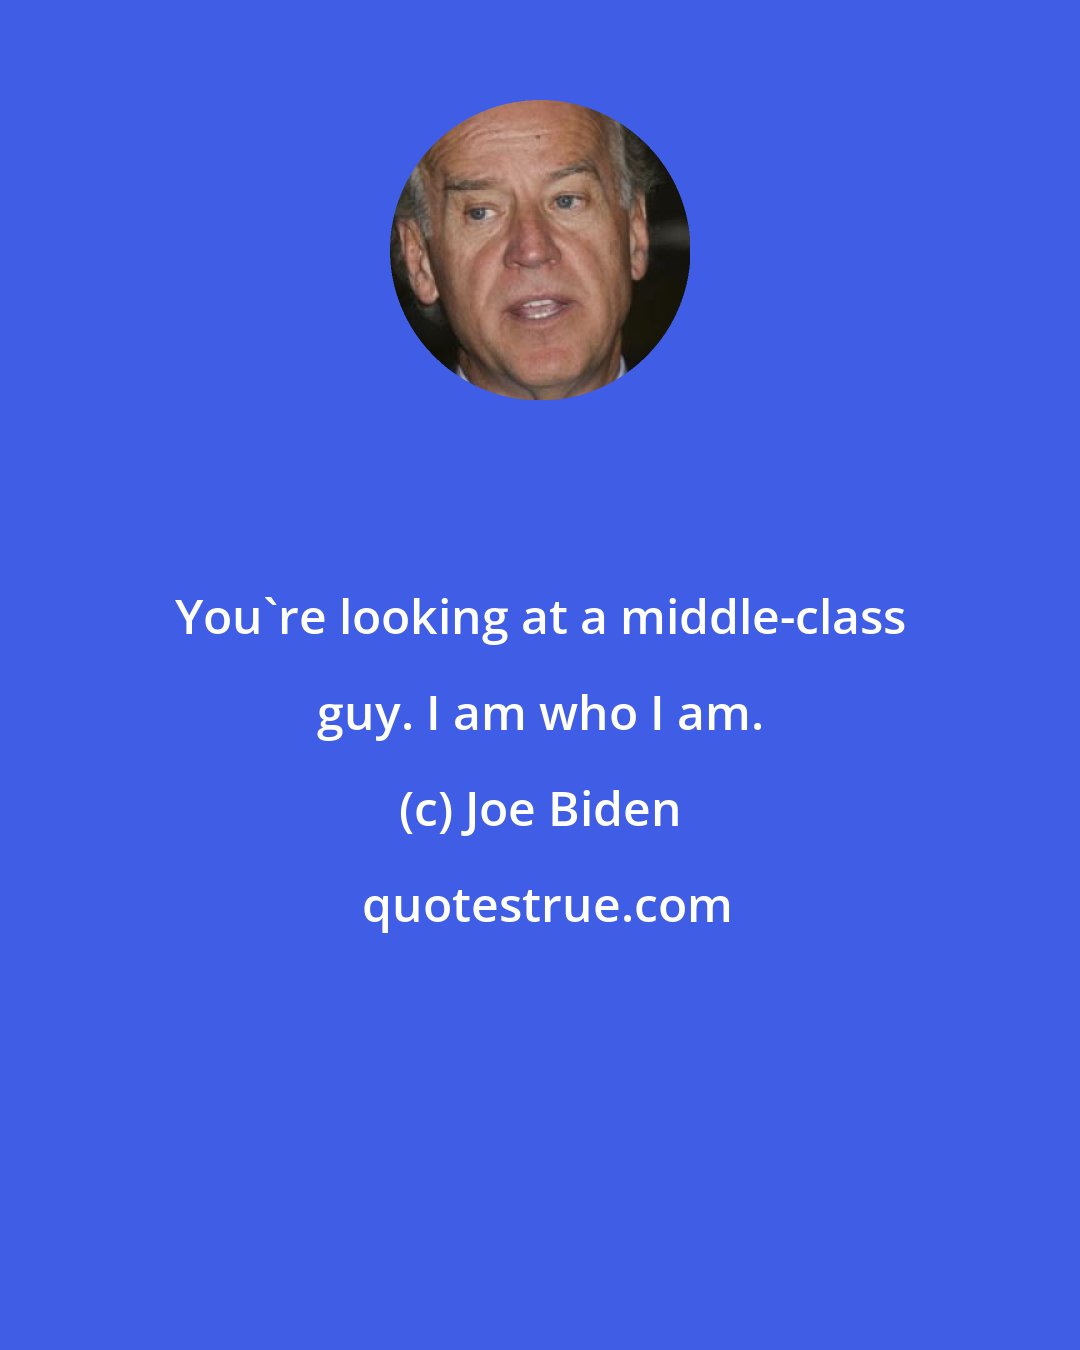 Joe Biden: You're looking at a middle-class guy. I am who I am.